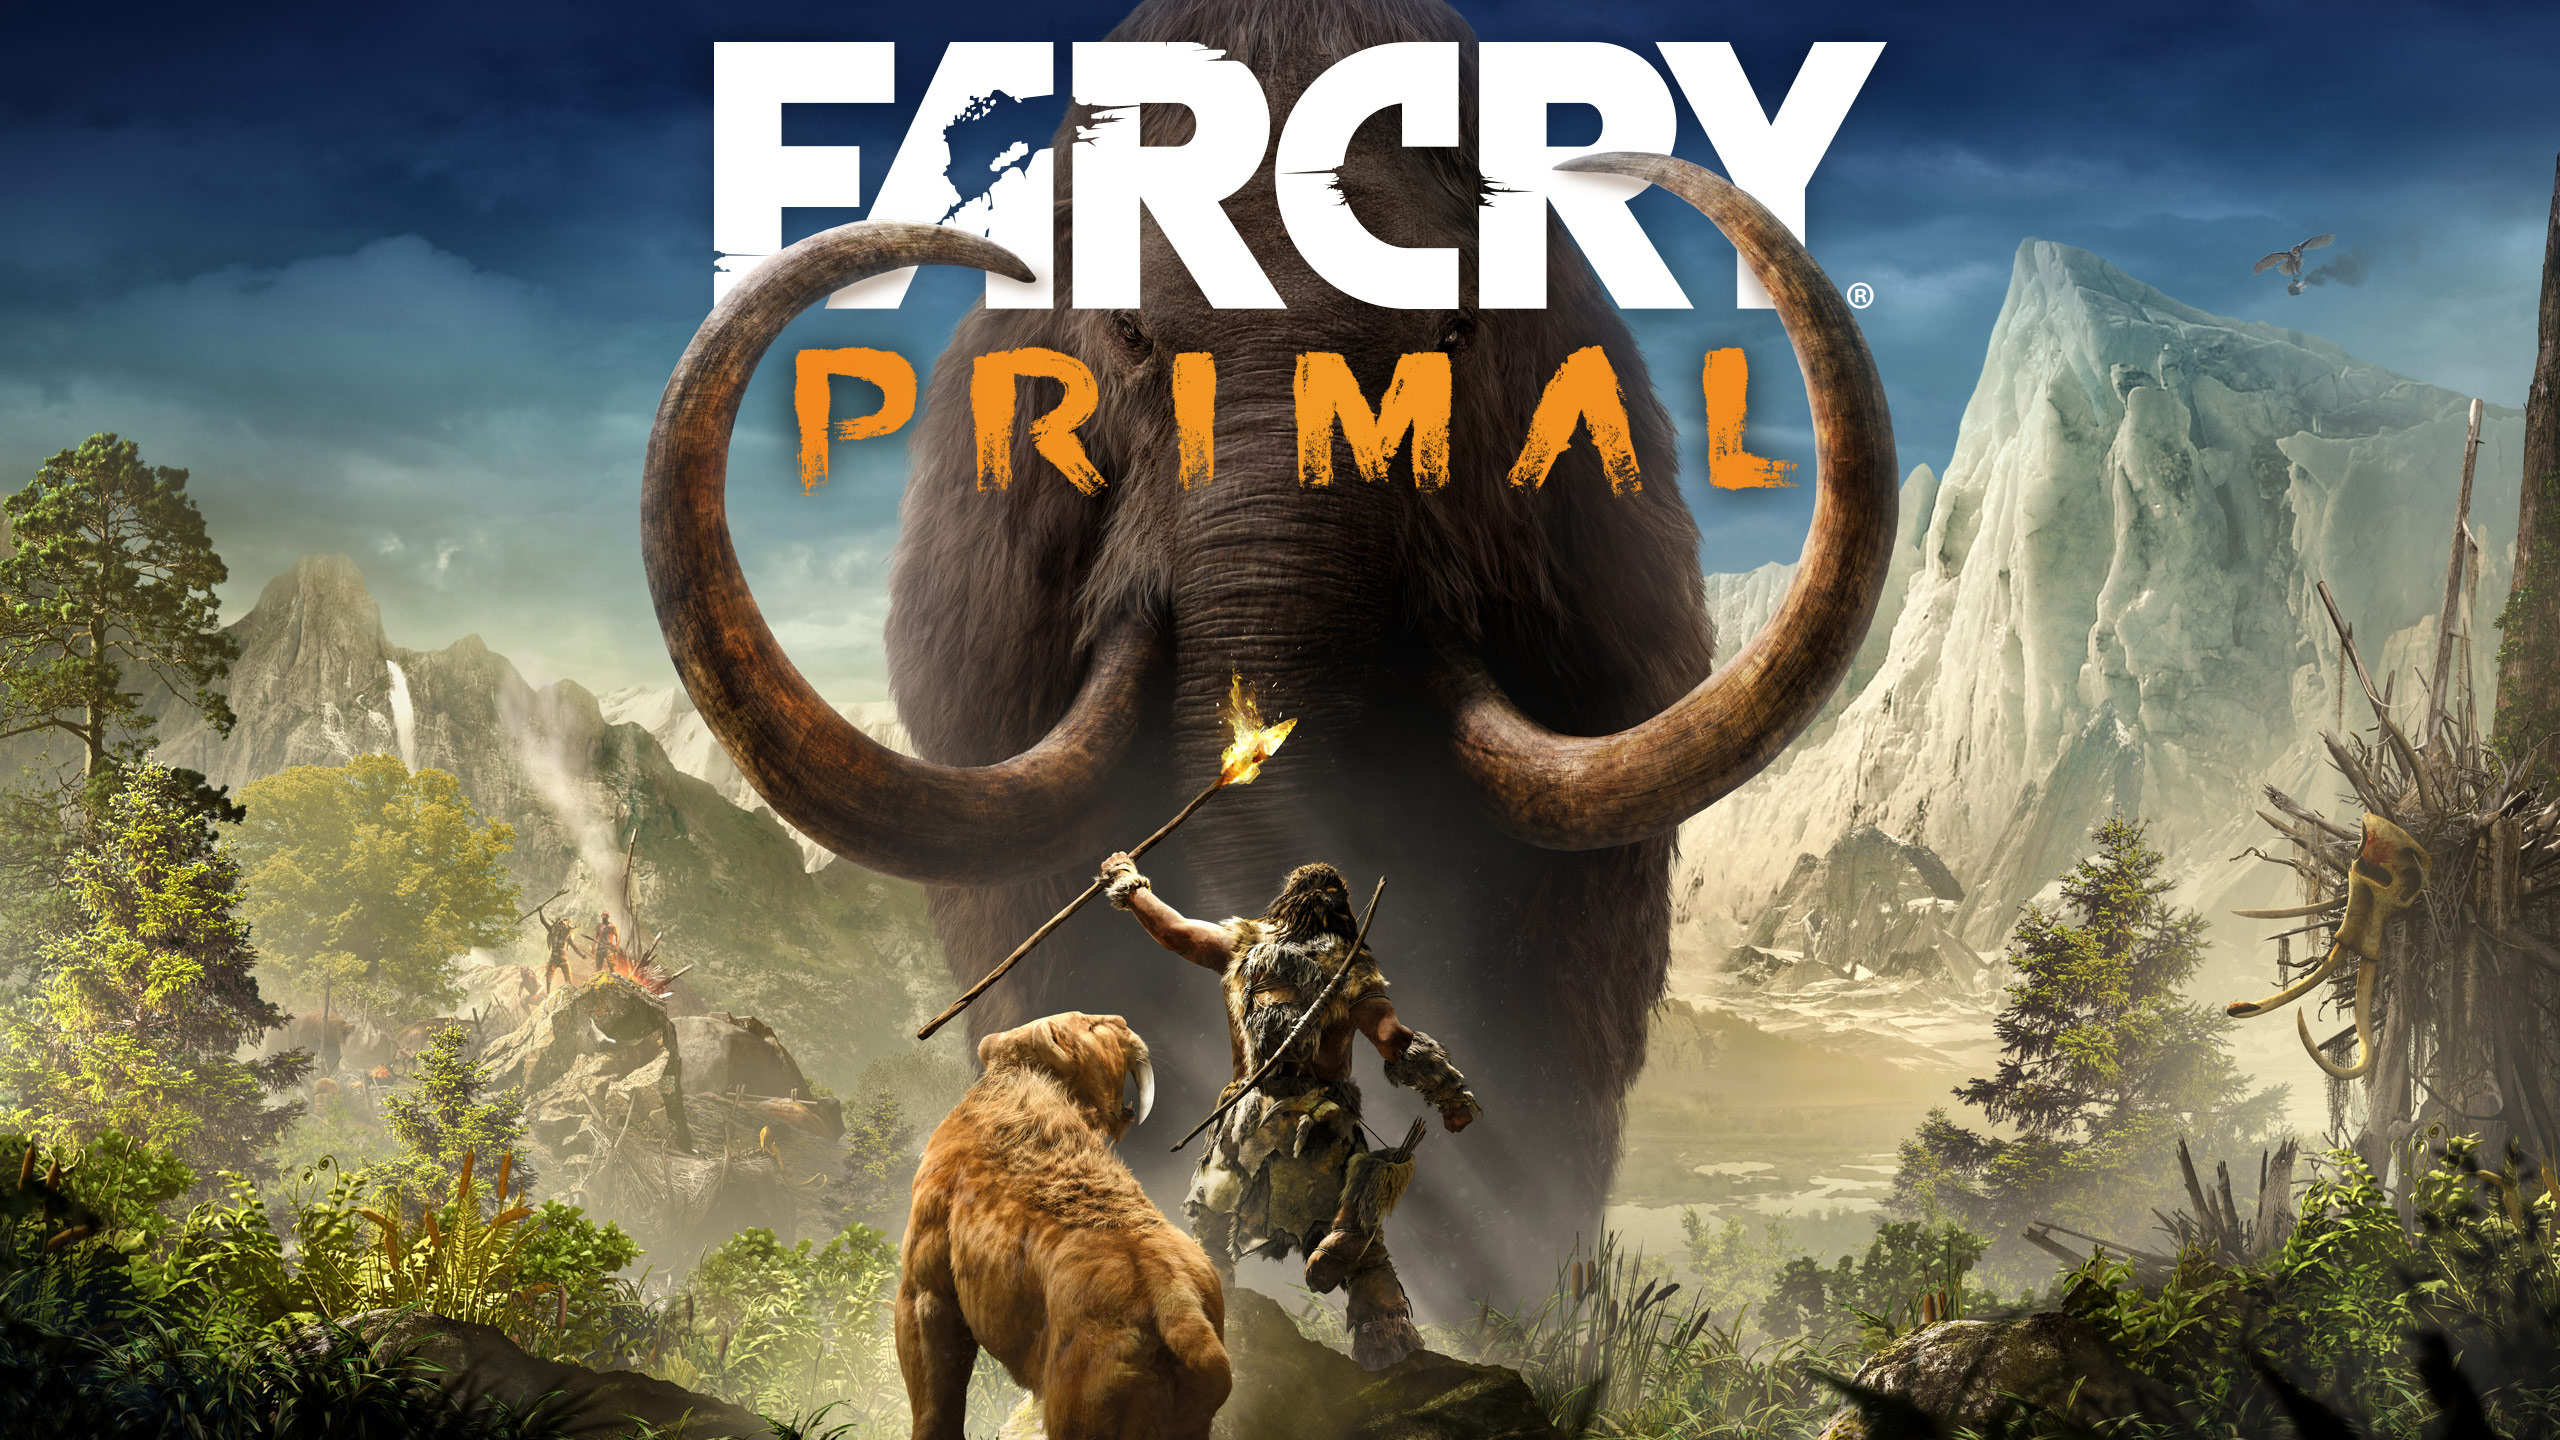 Far Cry Primal PS4 Version Full Game Free Download